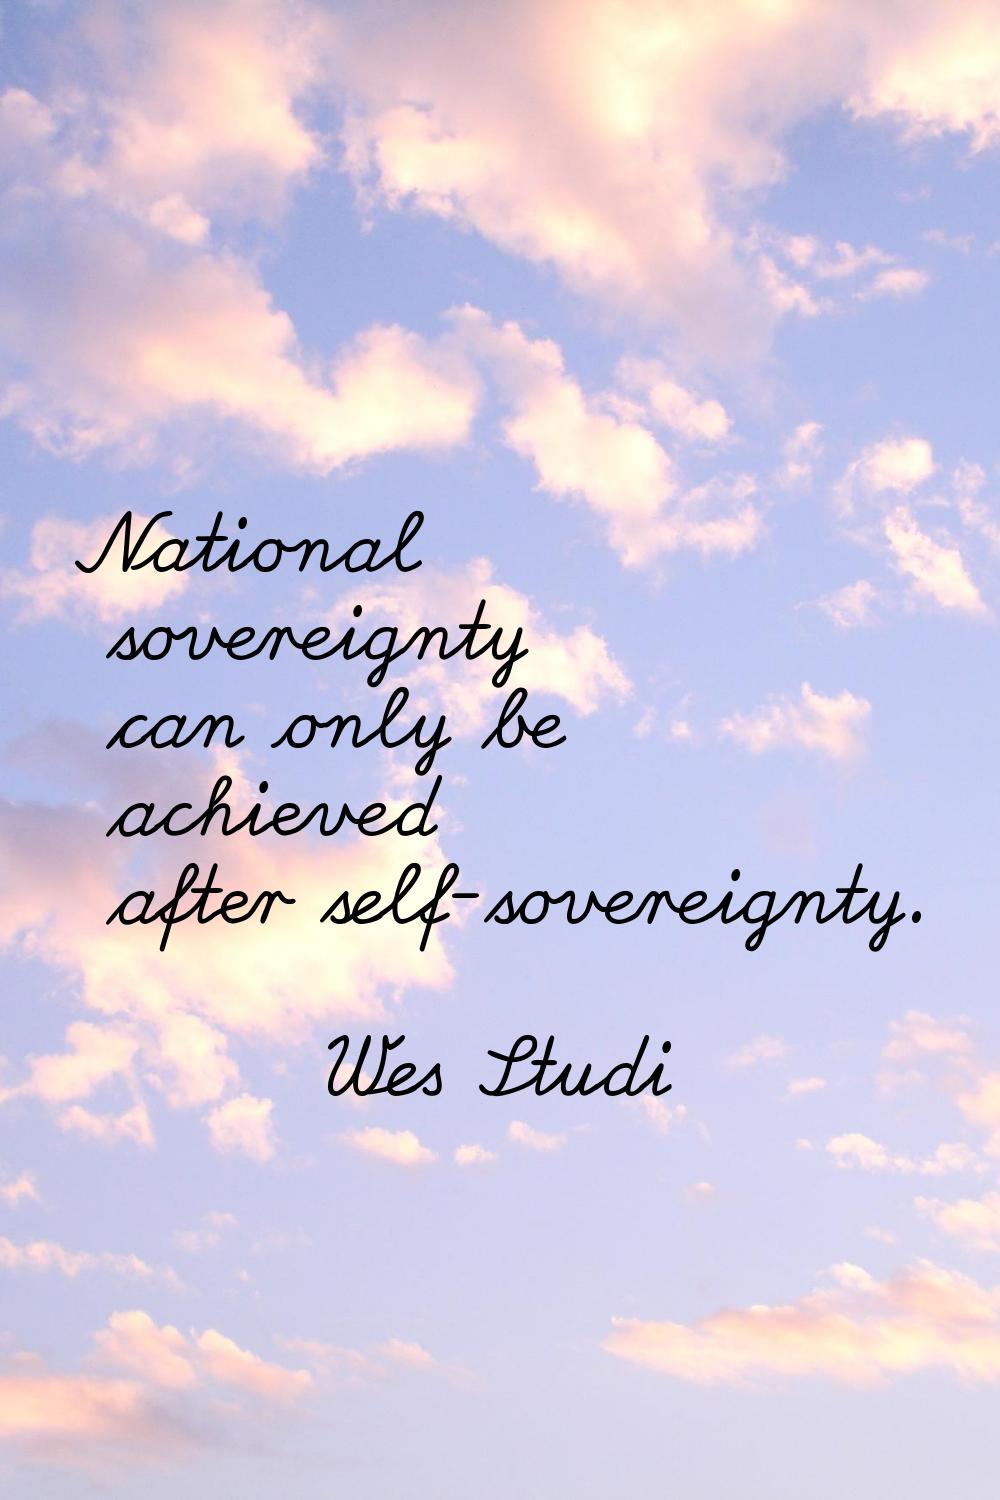 National sovereignty can only be achieved after self-sovereignty.